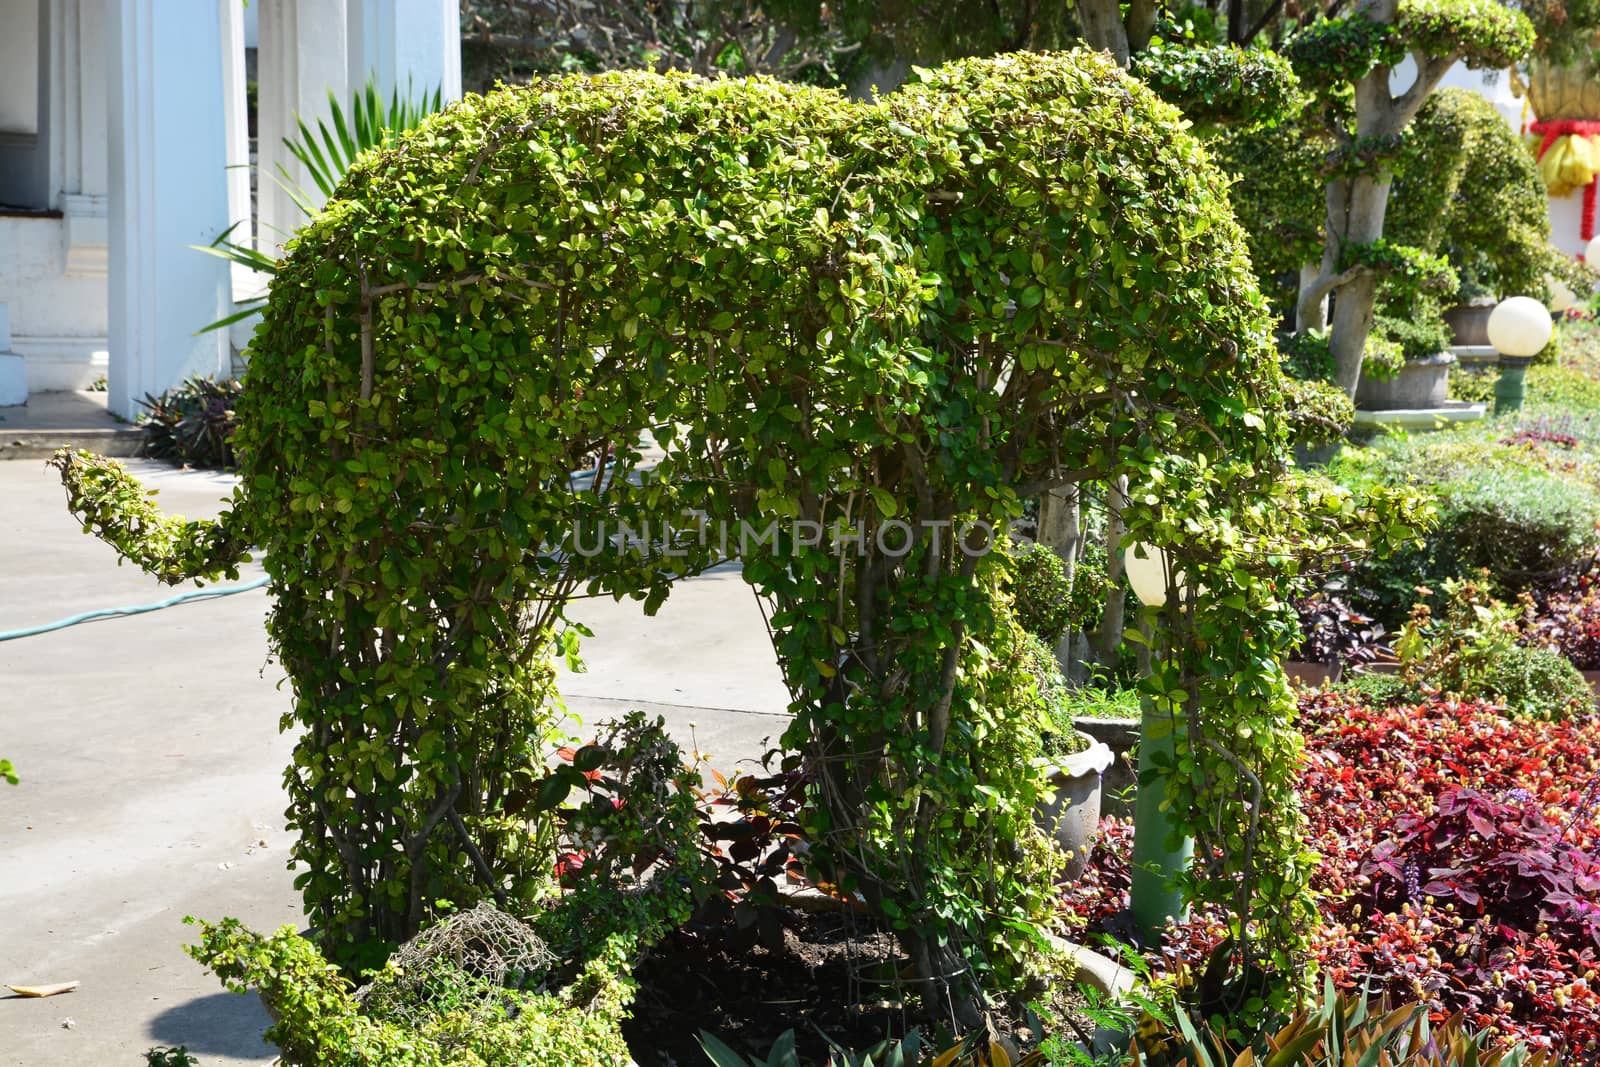 Topiary gardens. elephants created from bushes at green animals. landscape design by ideation90